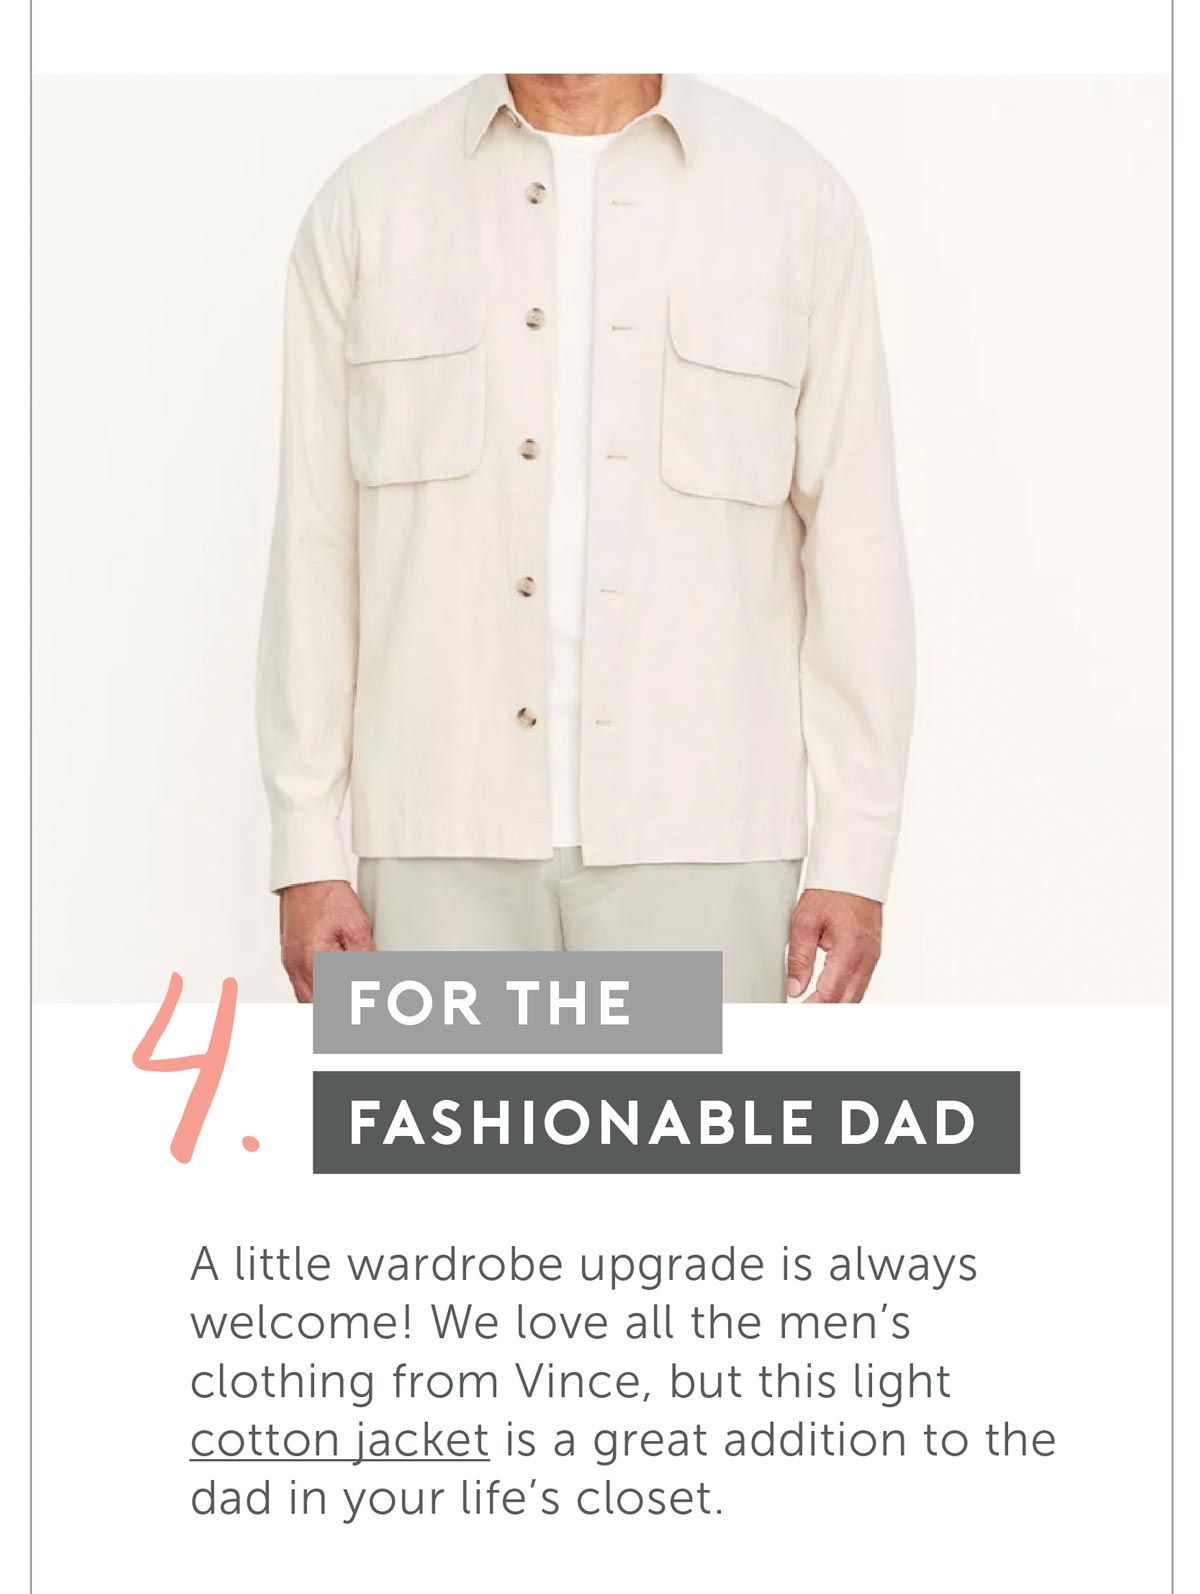 For The Fashionable Dad. A little wardrobe upgrade is always welcome! We love all the men’s clothing from Vince, but this light cotton jacket is a great addition to the dad in your life’s closet.